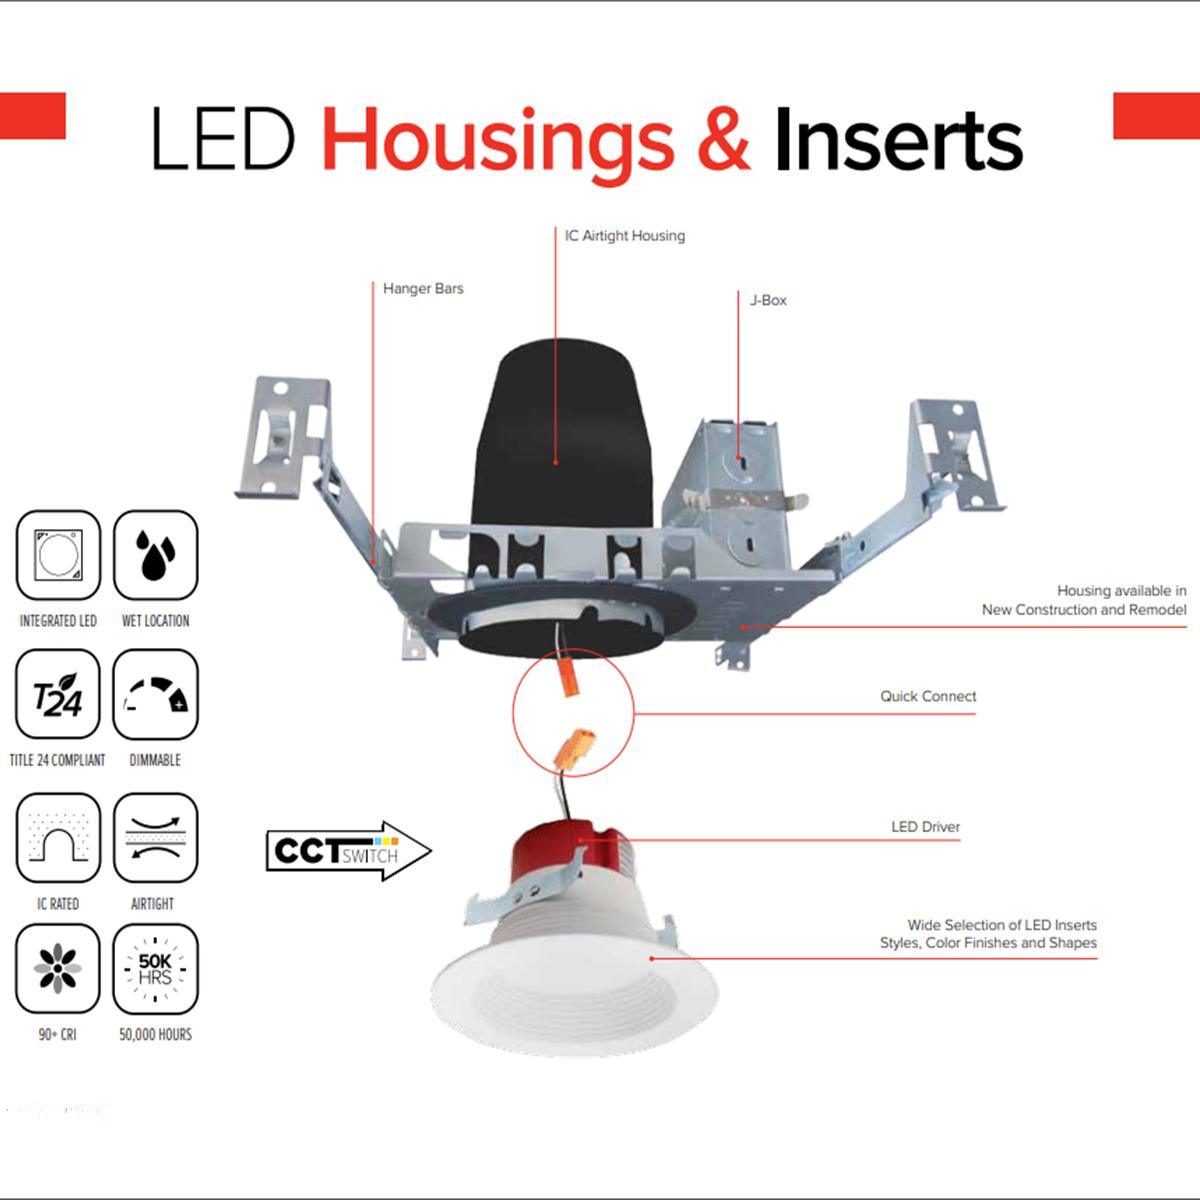 LED New Construction Housing, 6 in, IC Air-Tight, Quick Connect, 120V - Bees Lighting